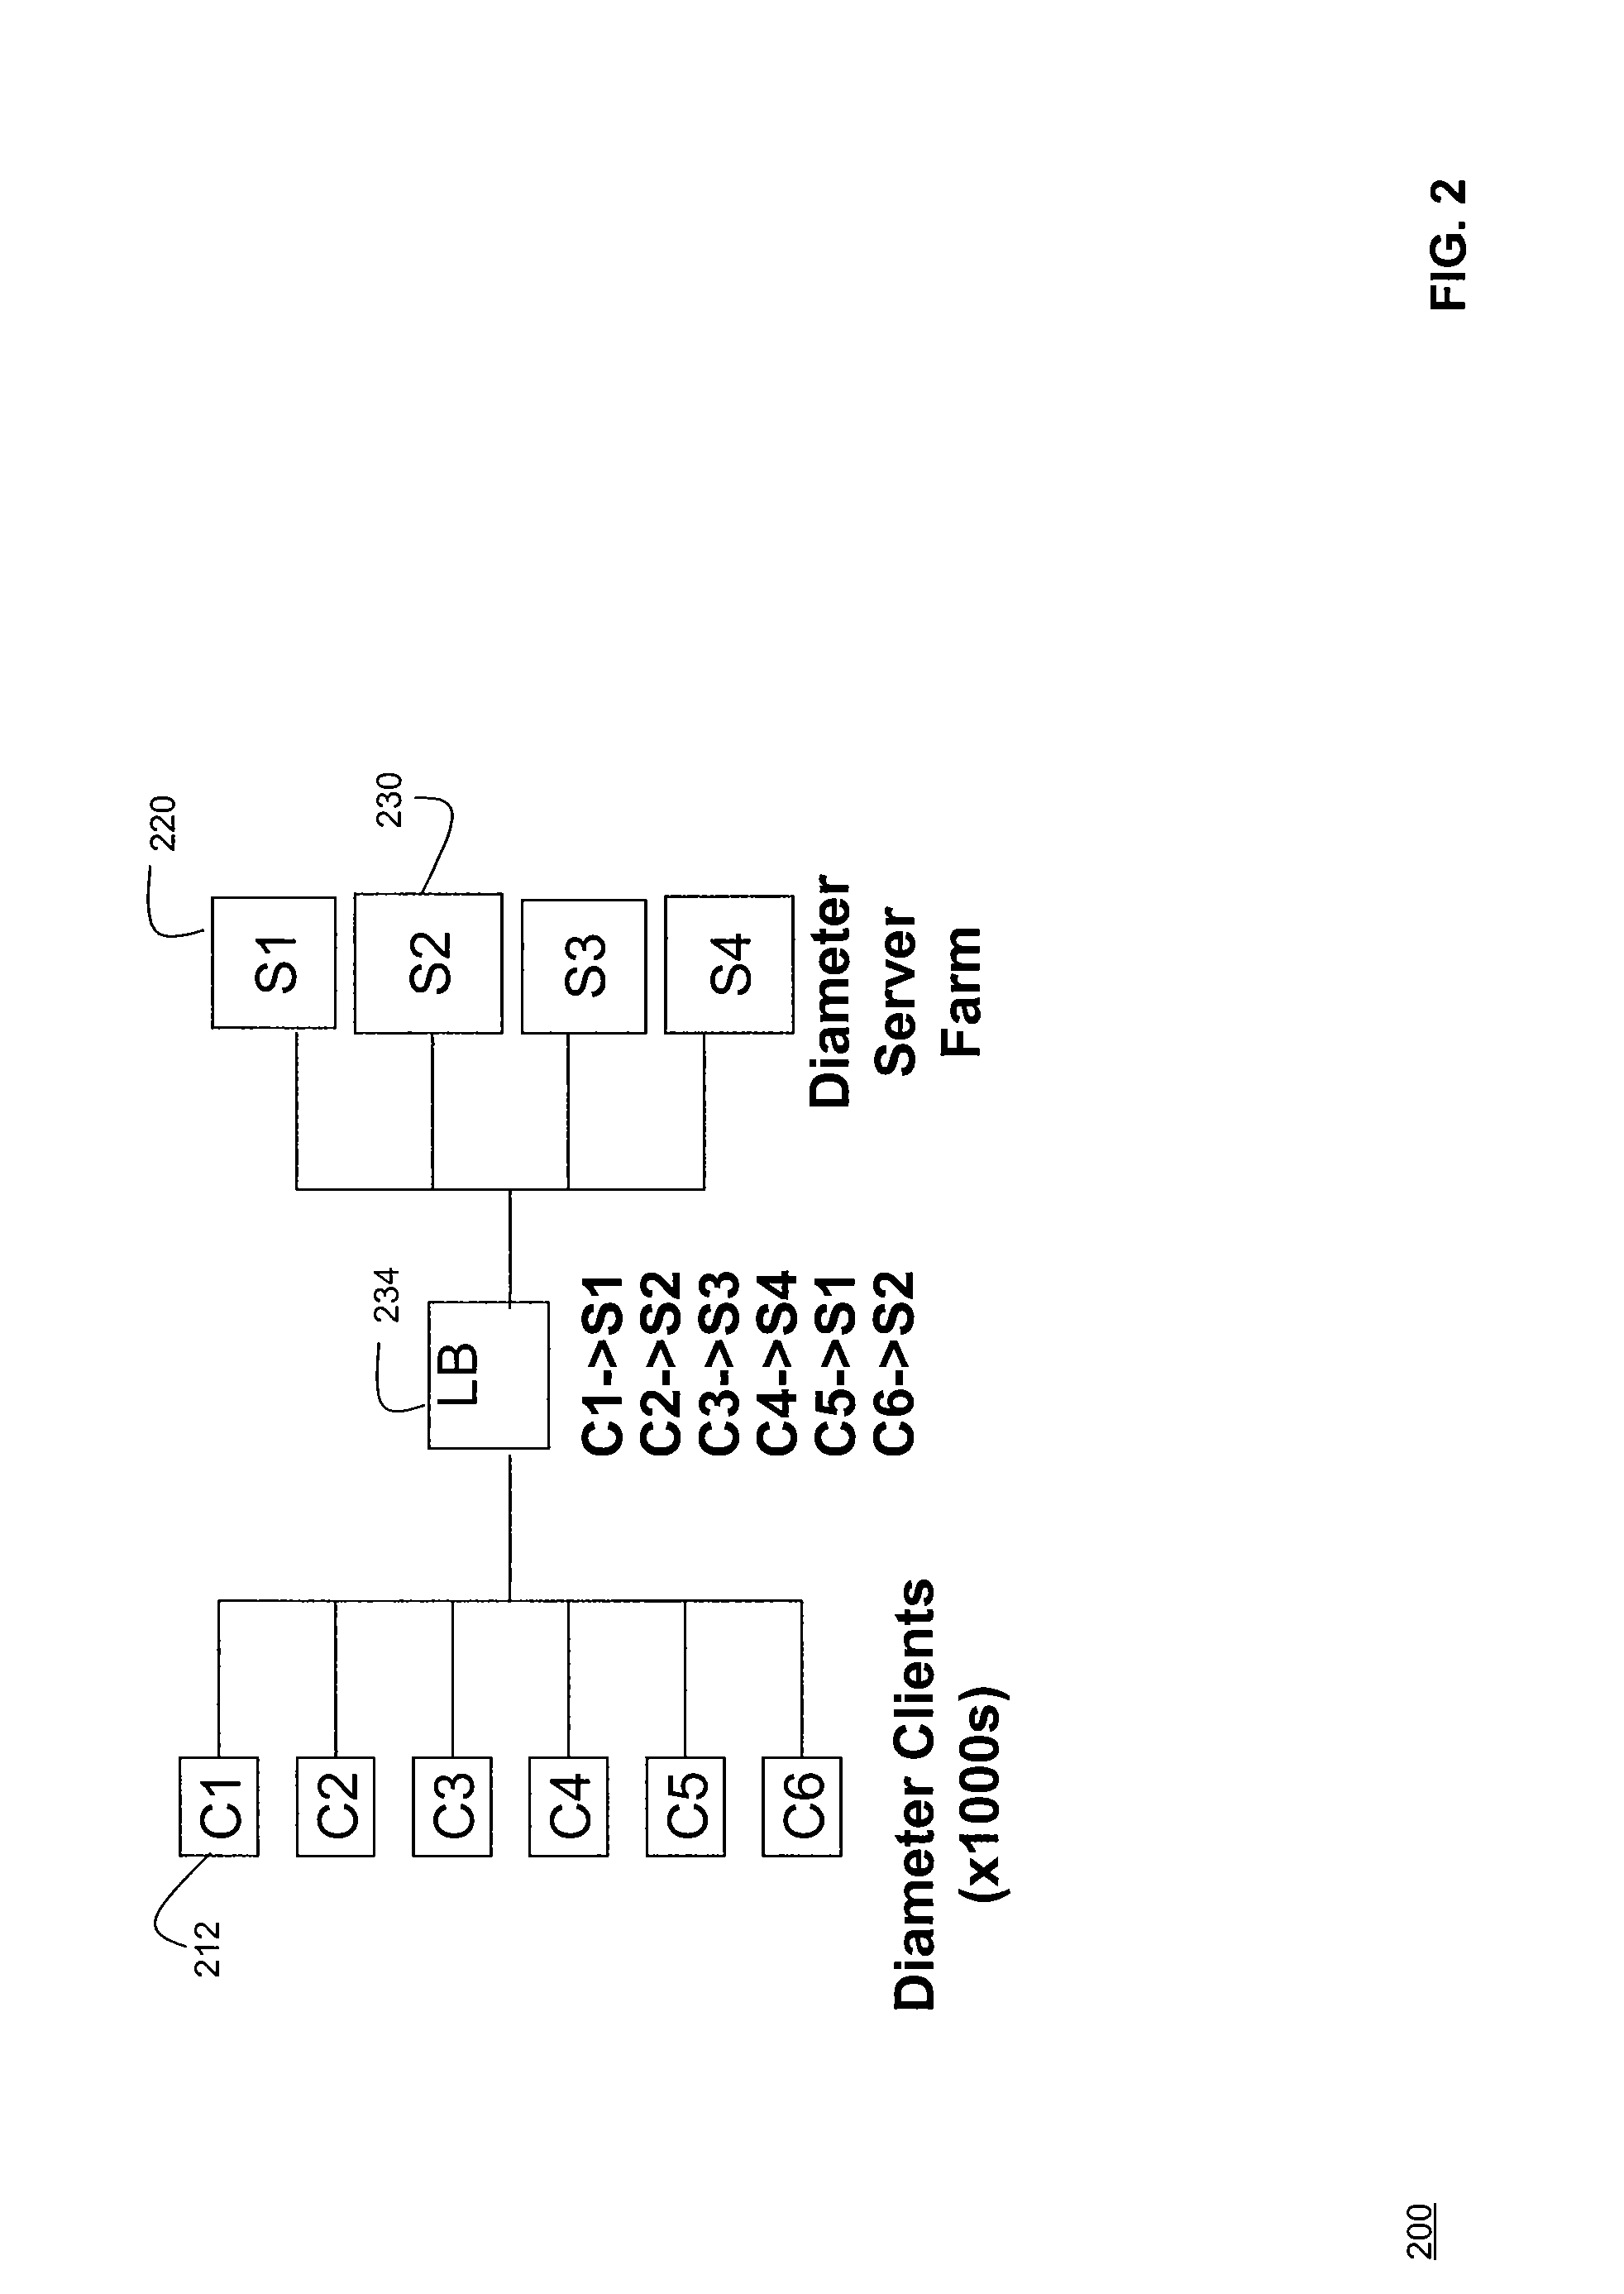 Systems and Methods for Server Load Balancing Using Authentication, Authorization, and Accounting Protocols